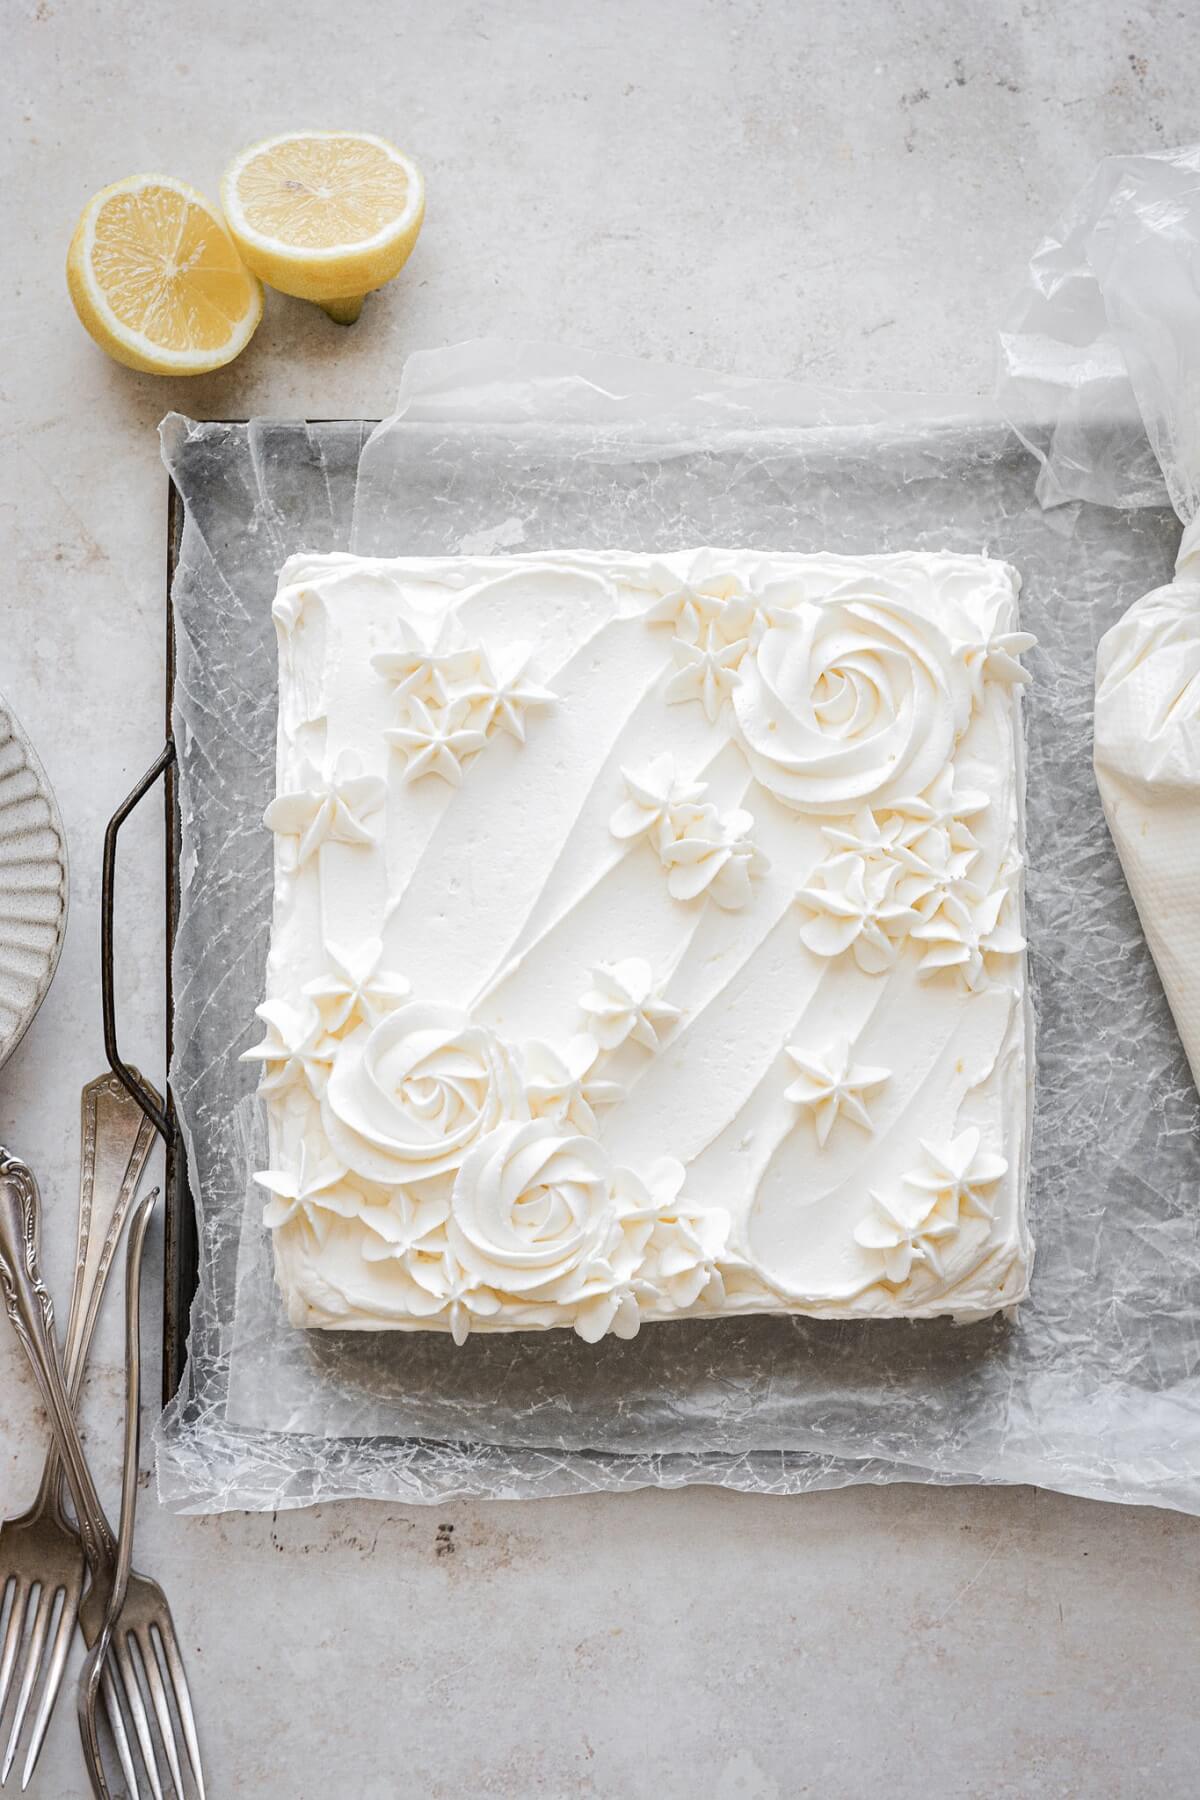 Lemon sheet cake with floral piped buttercream.